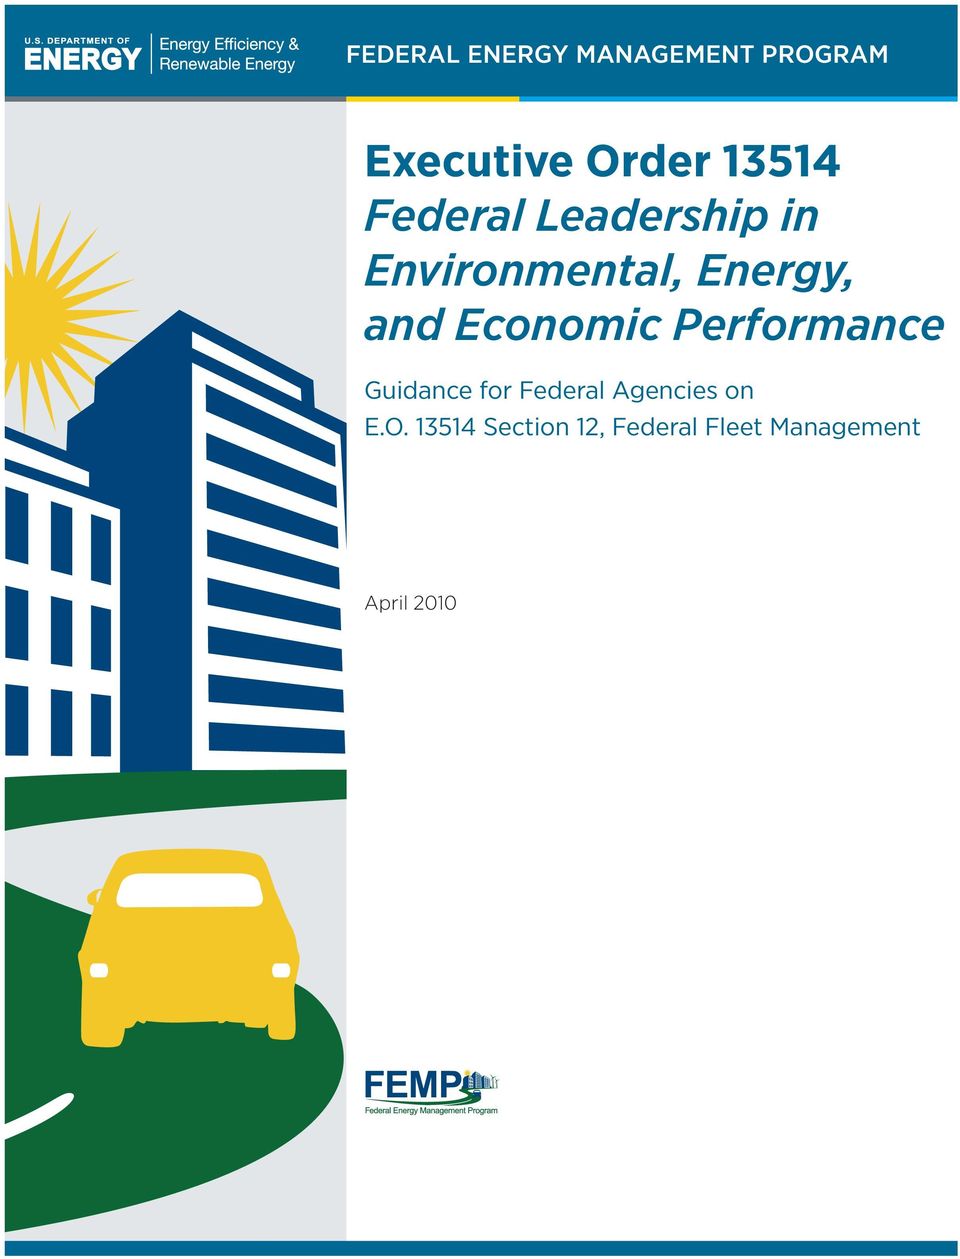 Economic Performance Guidance for Federal Agencies on